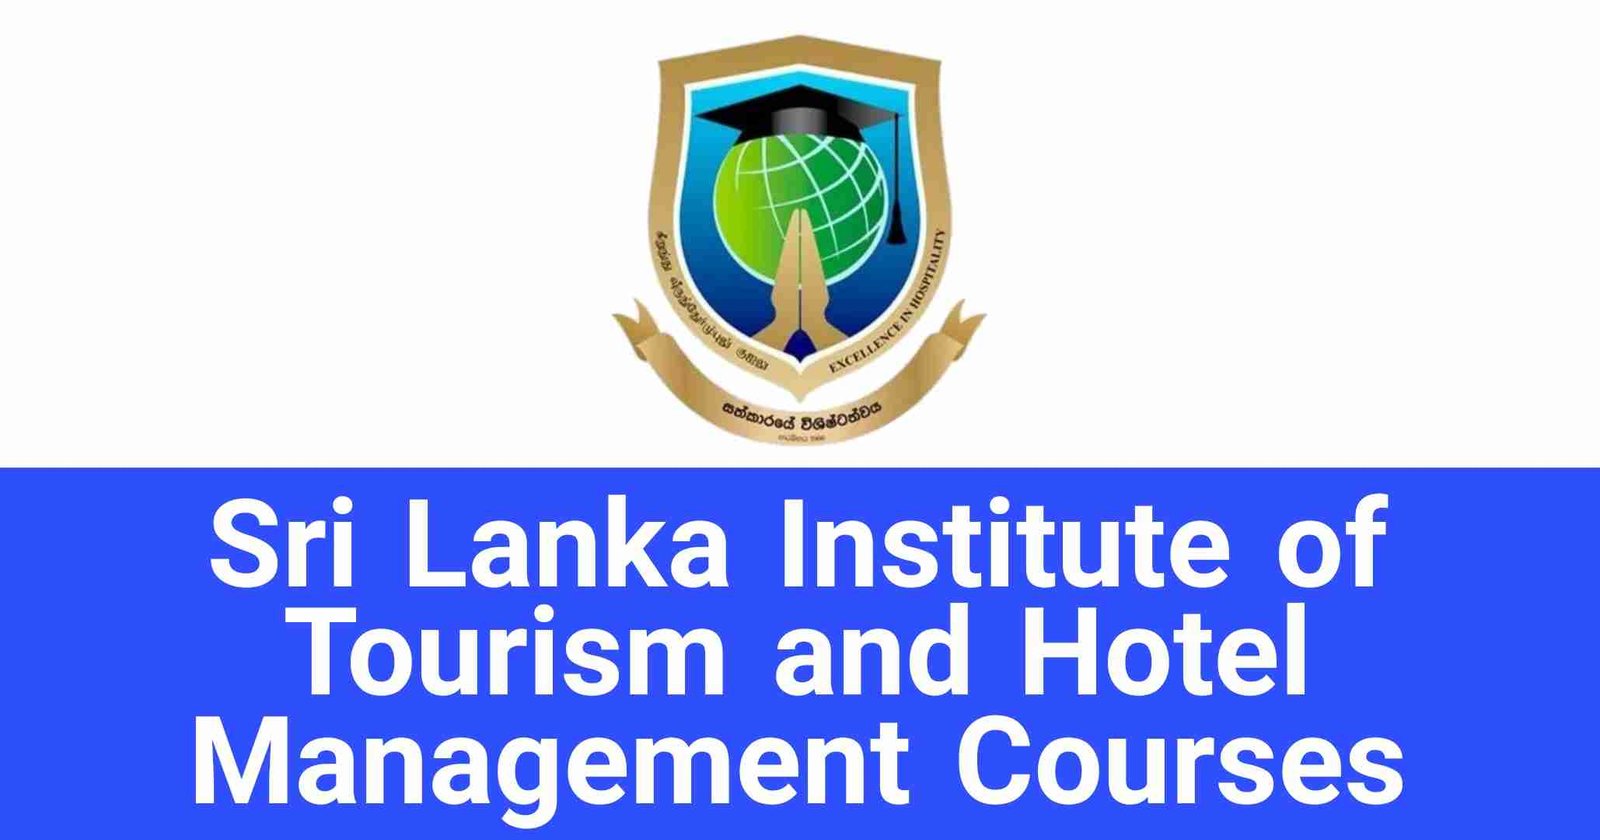 Sri Lanka Institute of Tourism and Hotel Management Courses